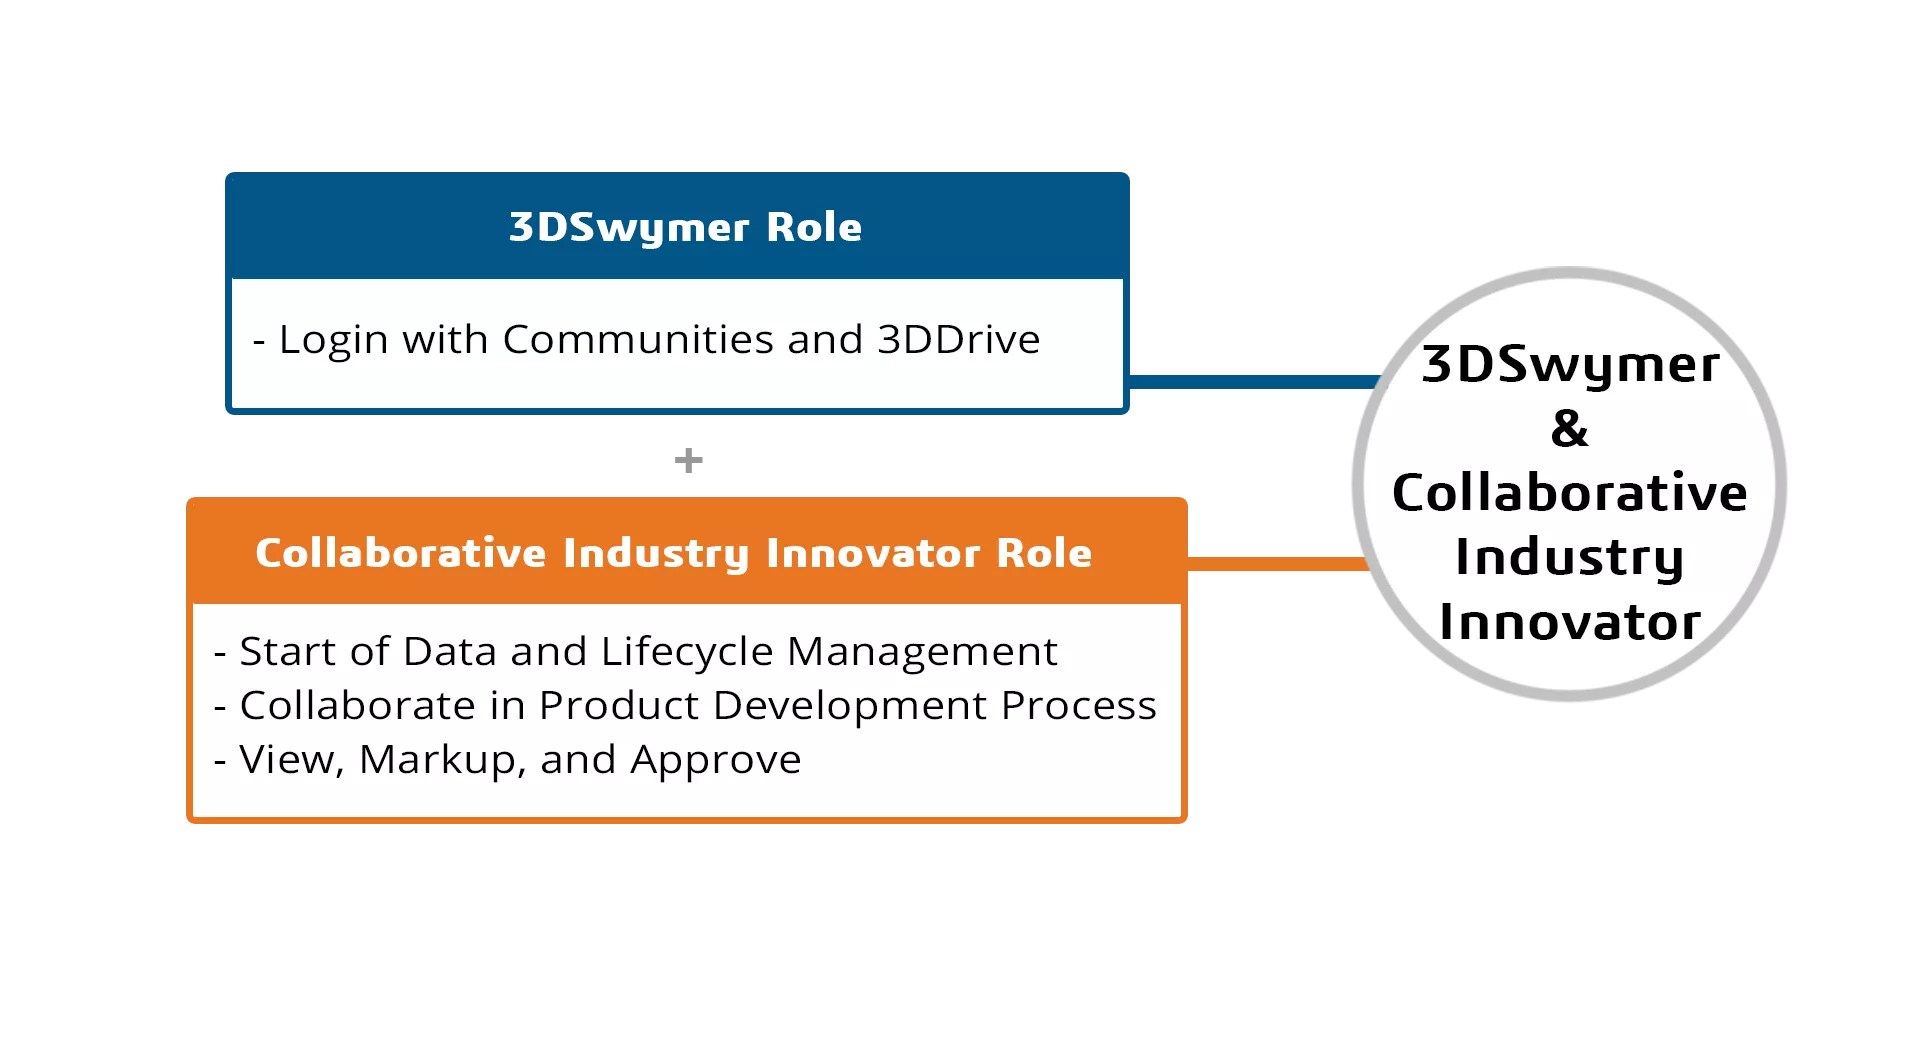 Get Pricing on 3DEXPERIENCE 3DSwymer and Collaborative Industry Innovator from GoEngineer!